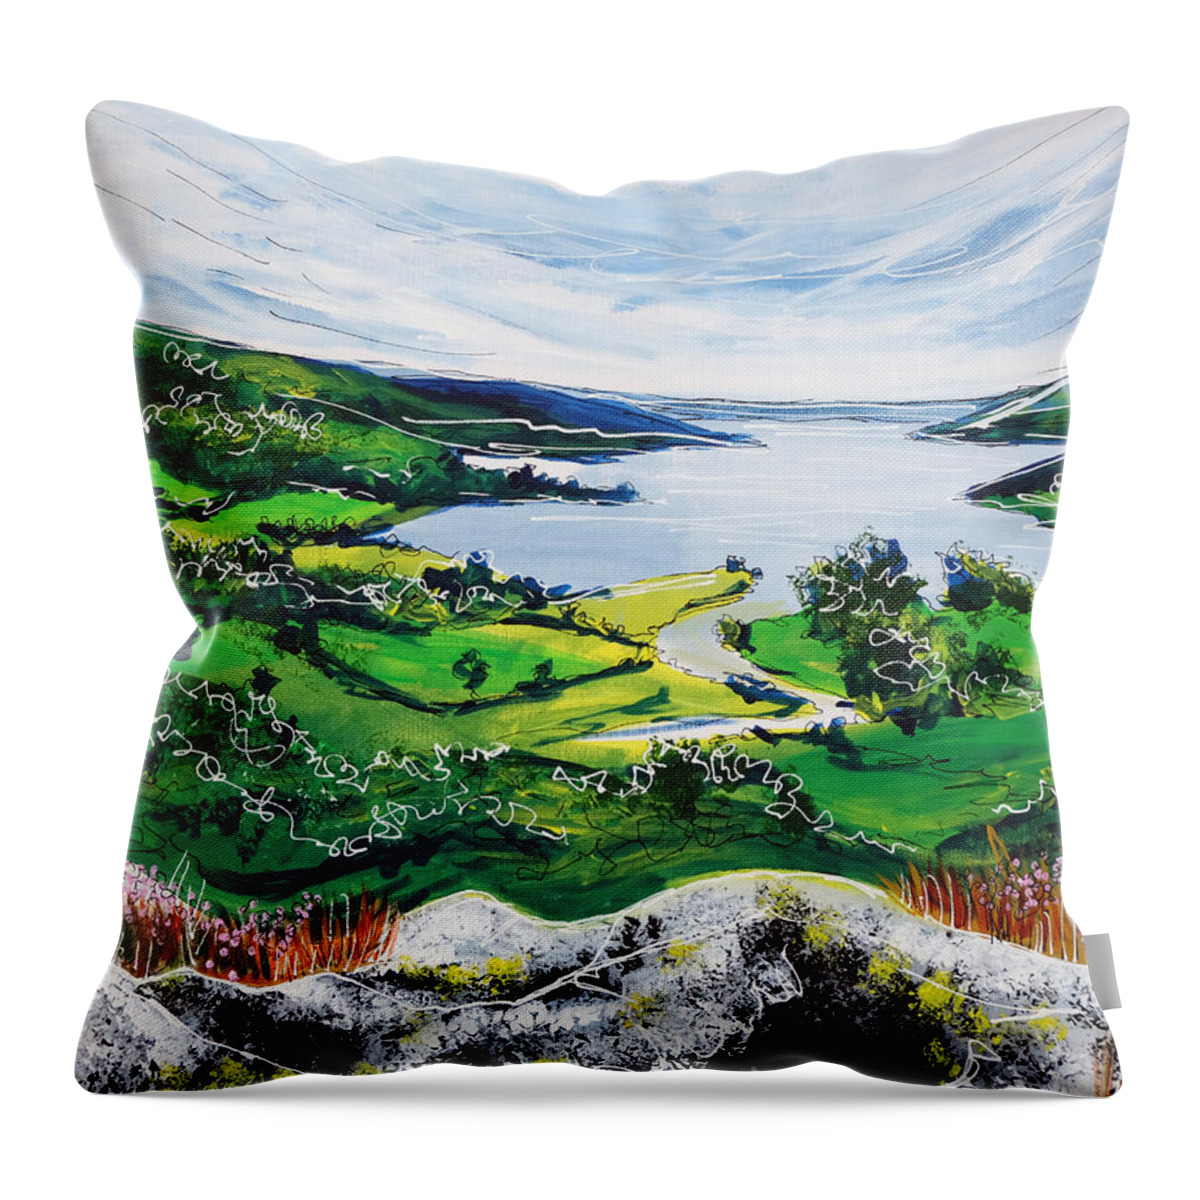 Lake Windermere Throw Pillow featuring the painting Lake Windermere by Laura Hol Art